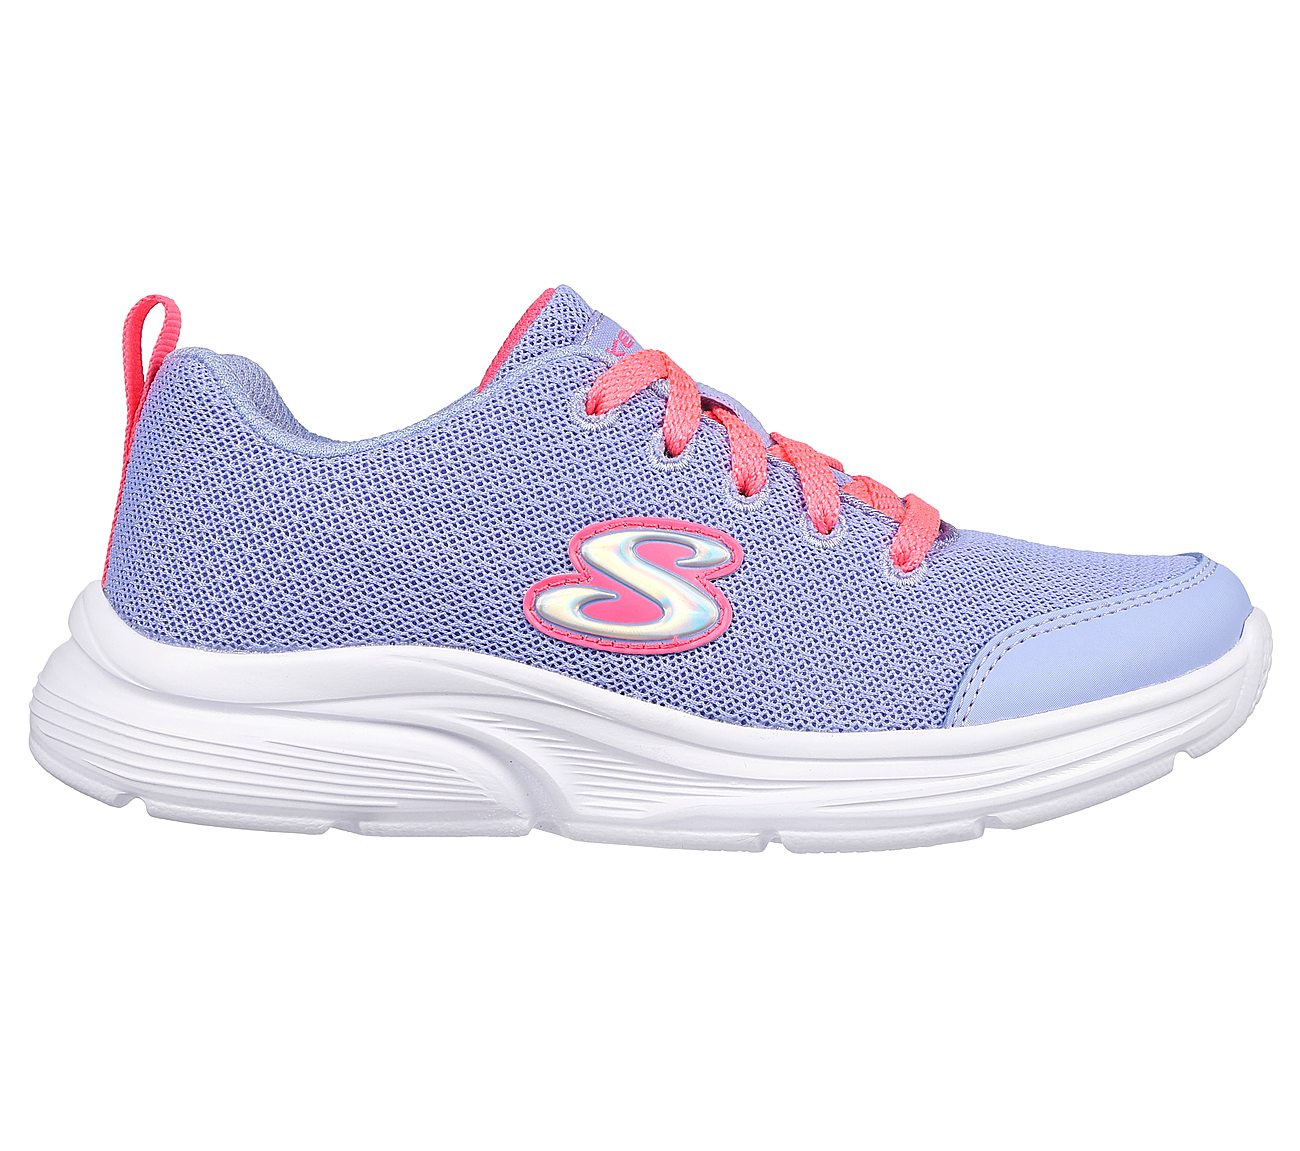 WAVY LITES - BLISSFUL WISH, PERIWINKLE Footwear Lateral View